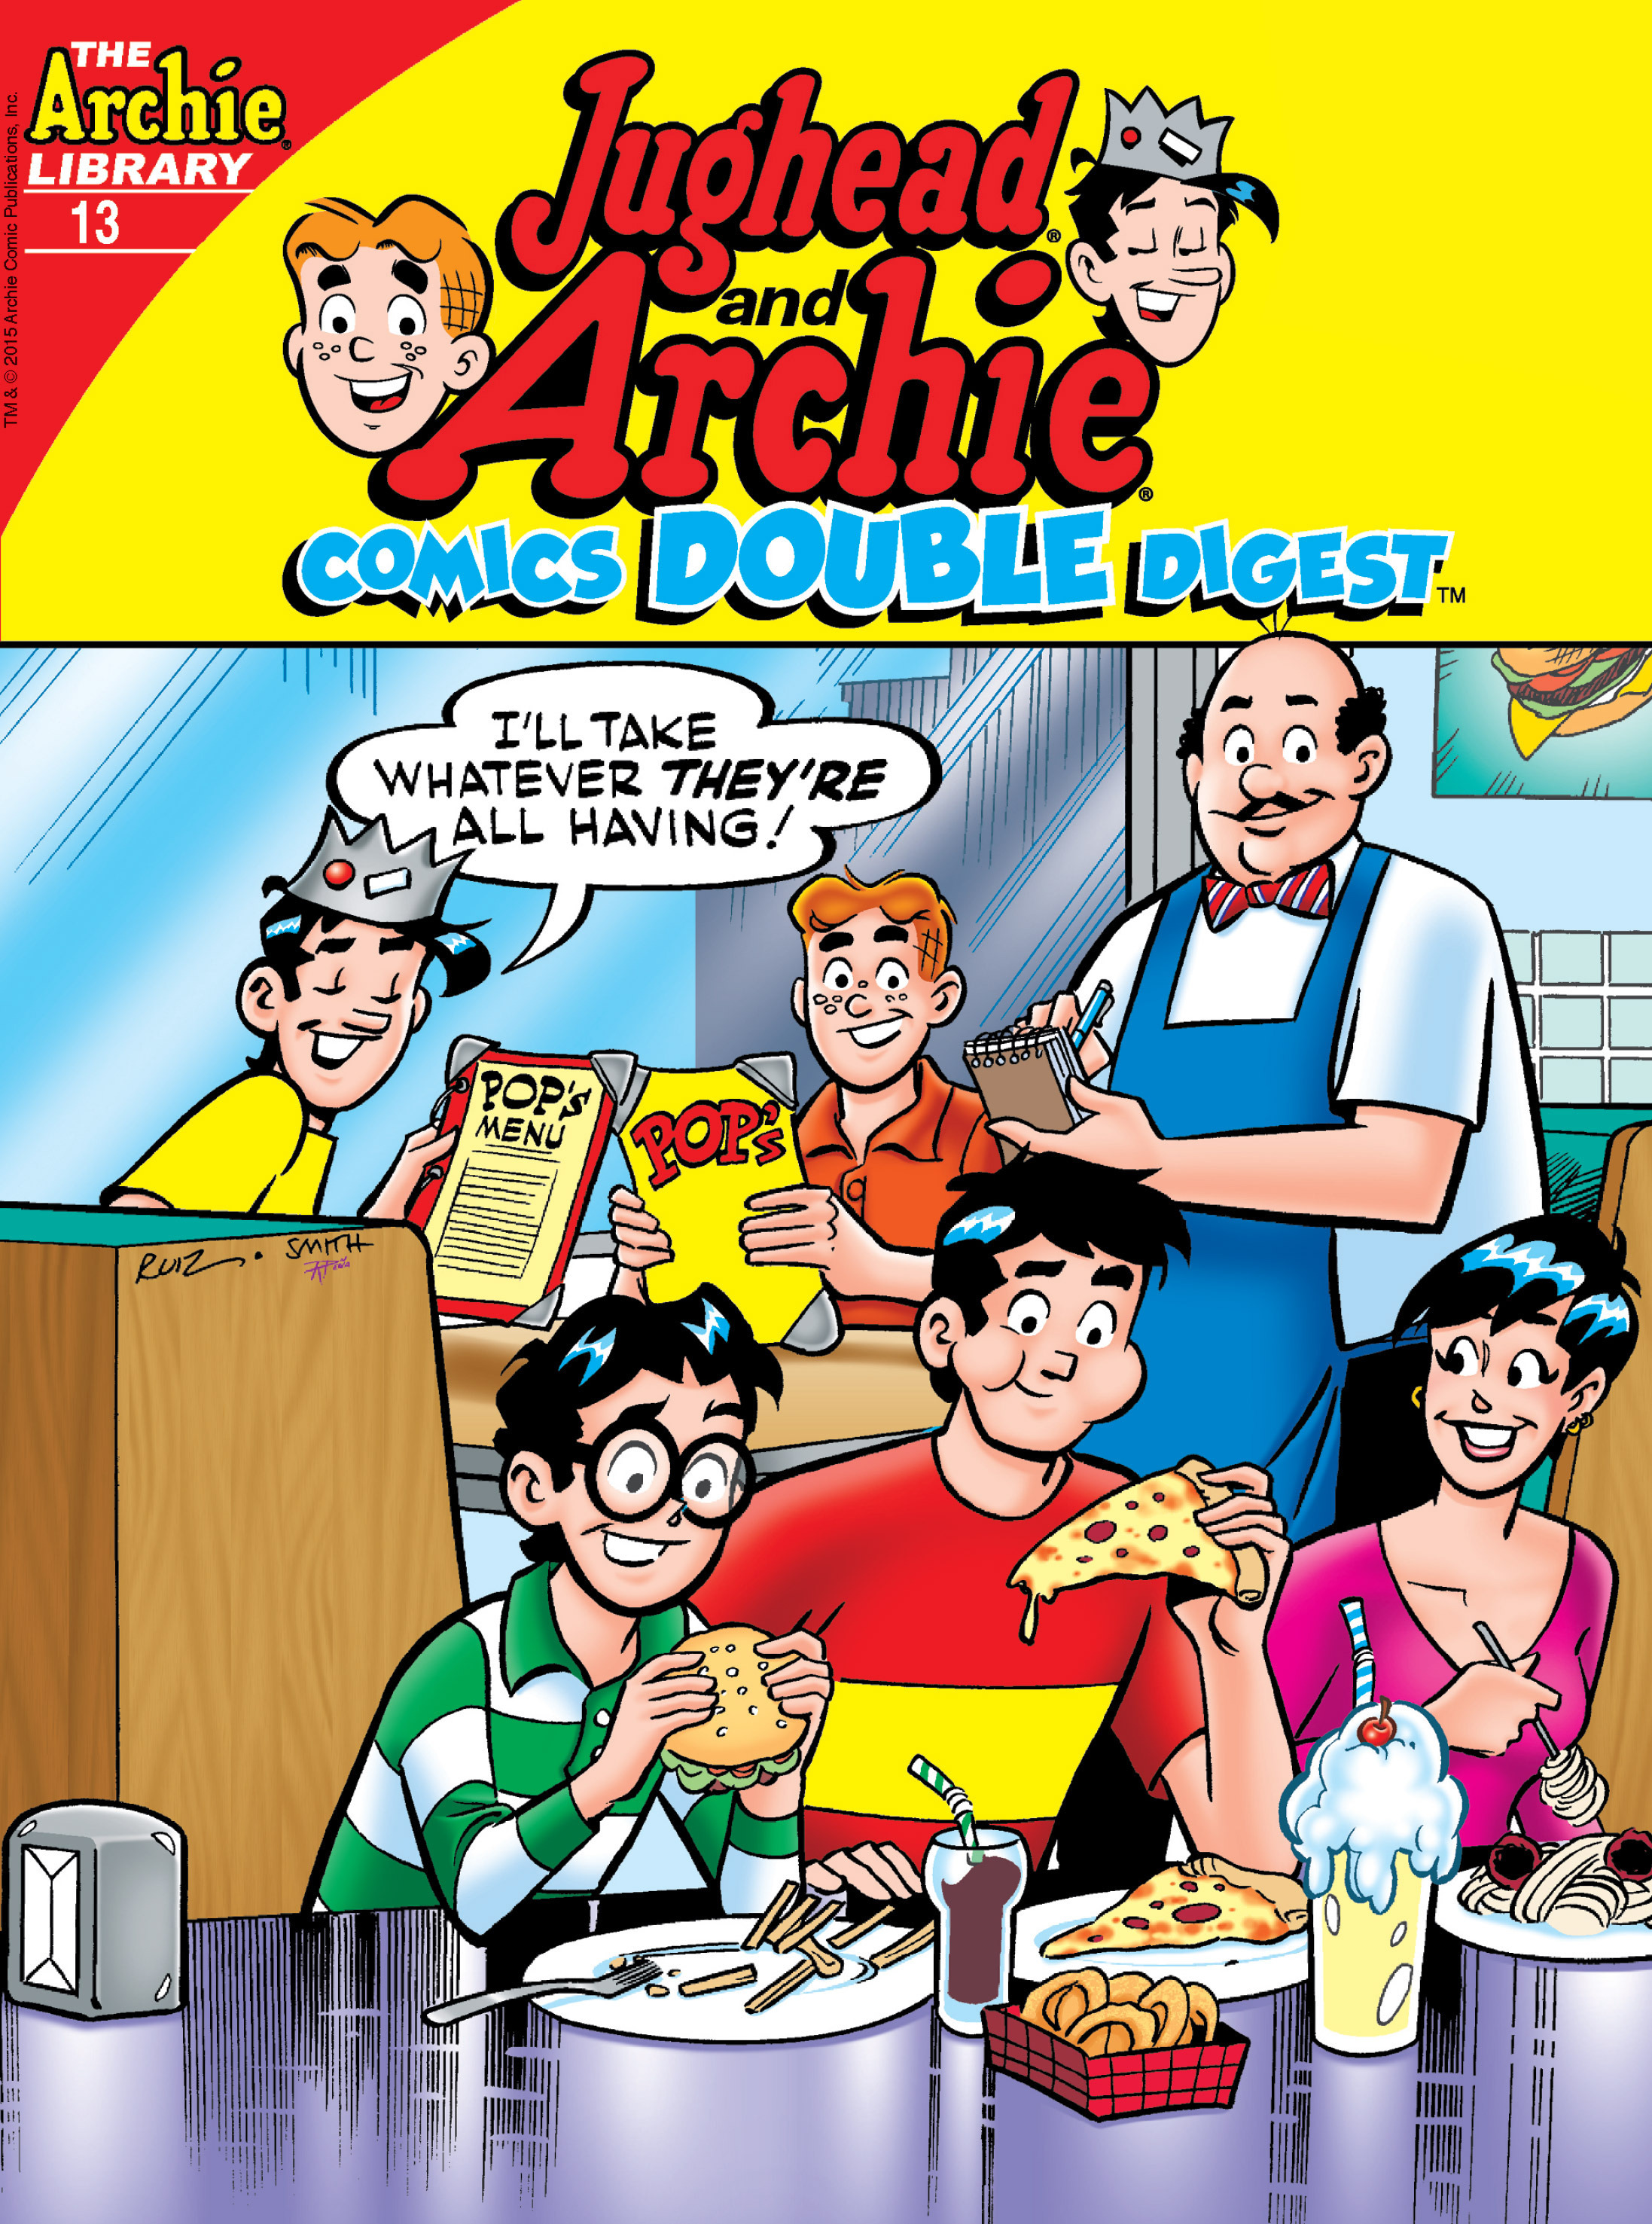 Read online Jughead and Archie Double Digest comic - Issue #13.